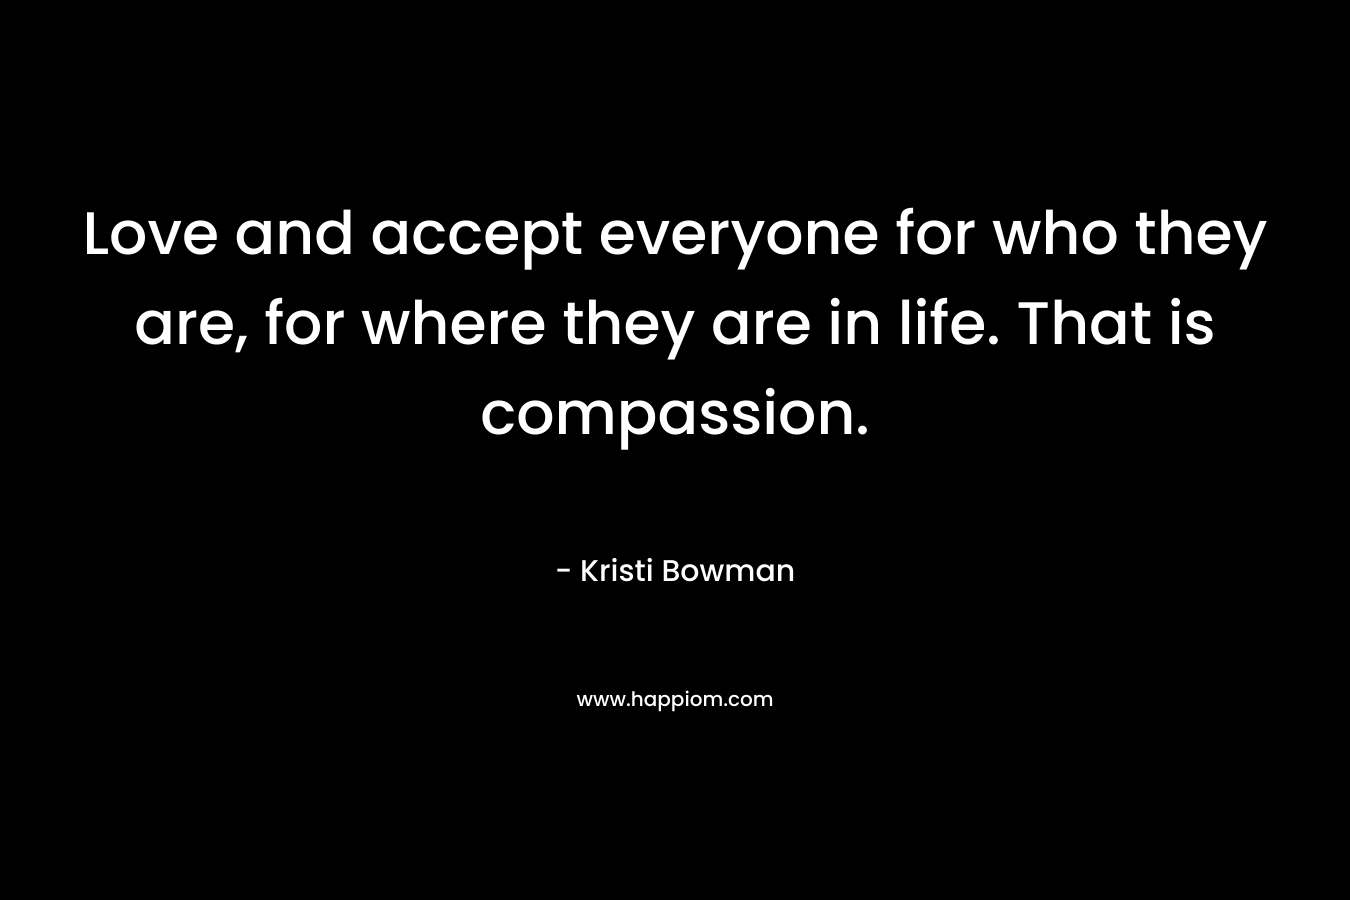 Love and accept everyone for who they are, for where they are in life. That is compassion. – Kristi Bowman